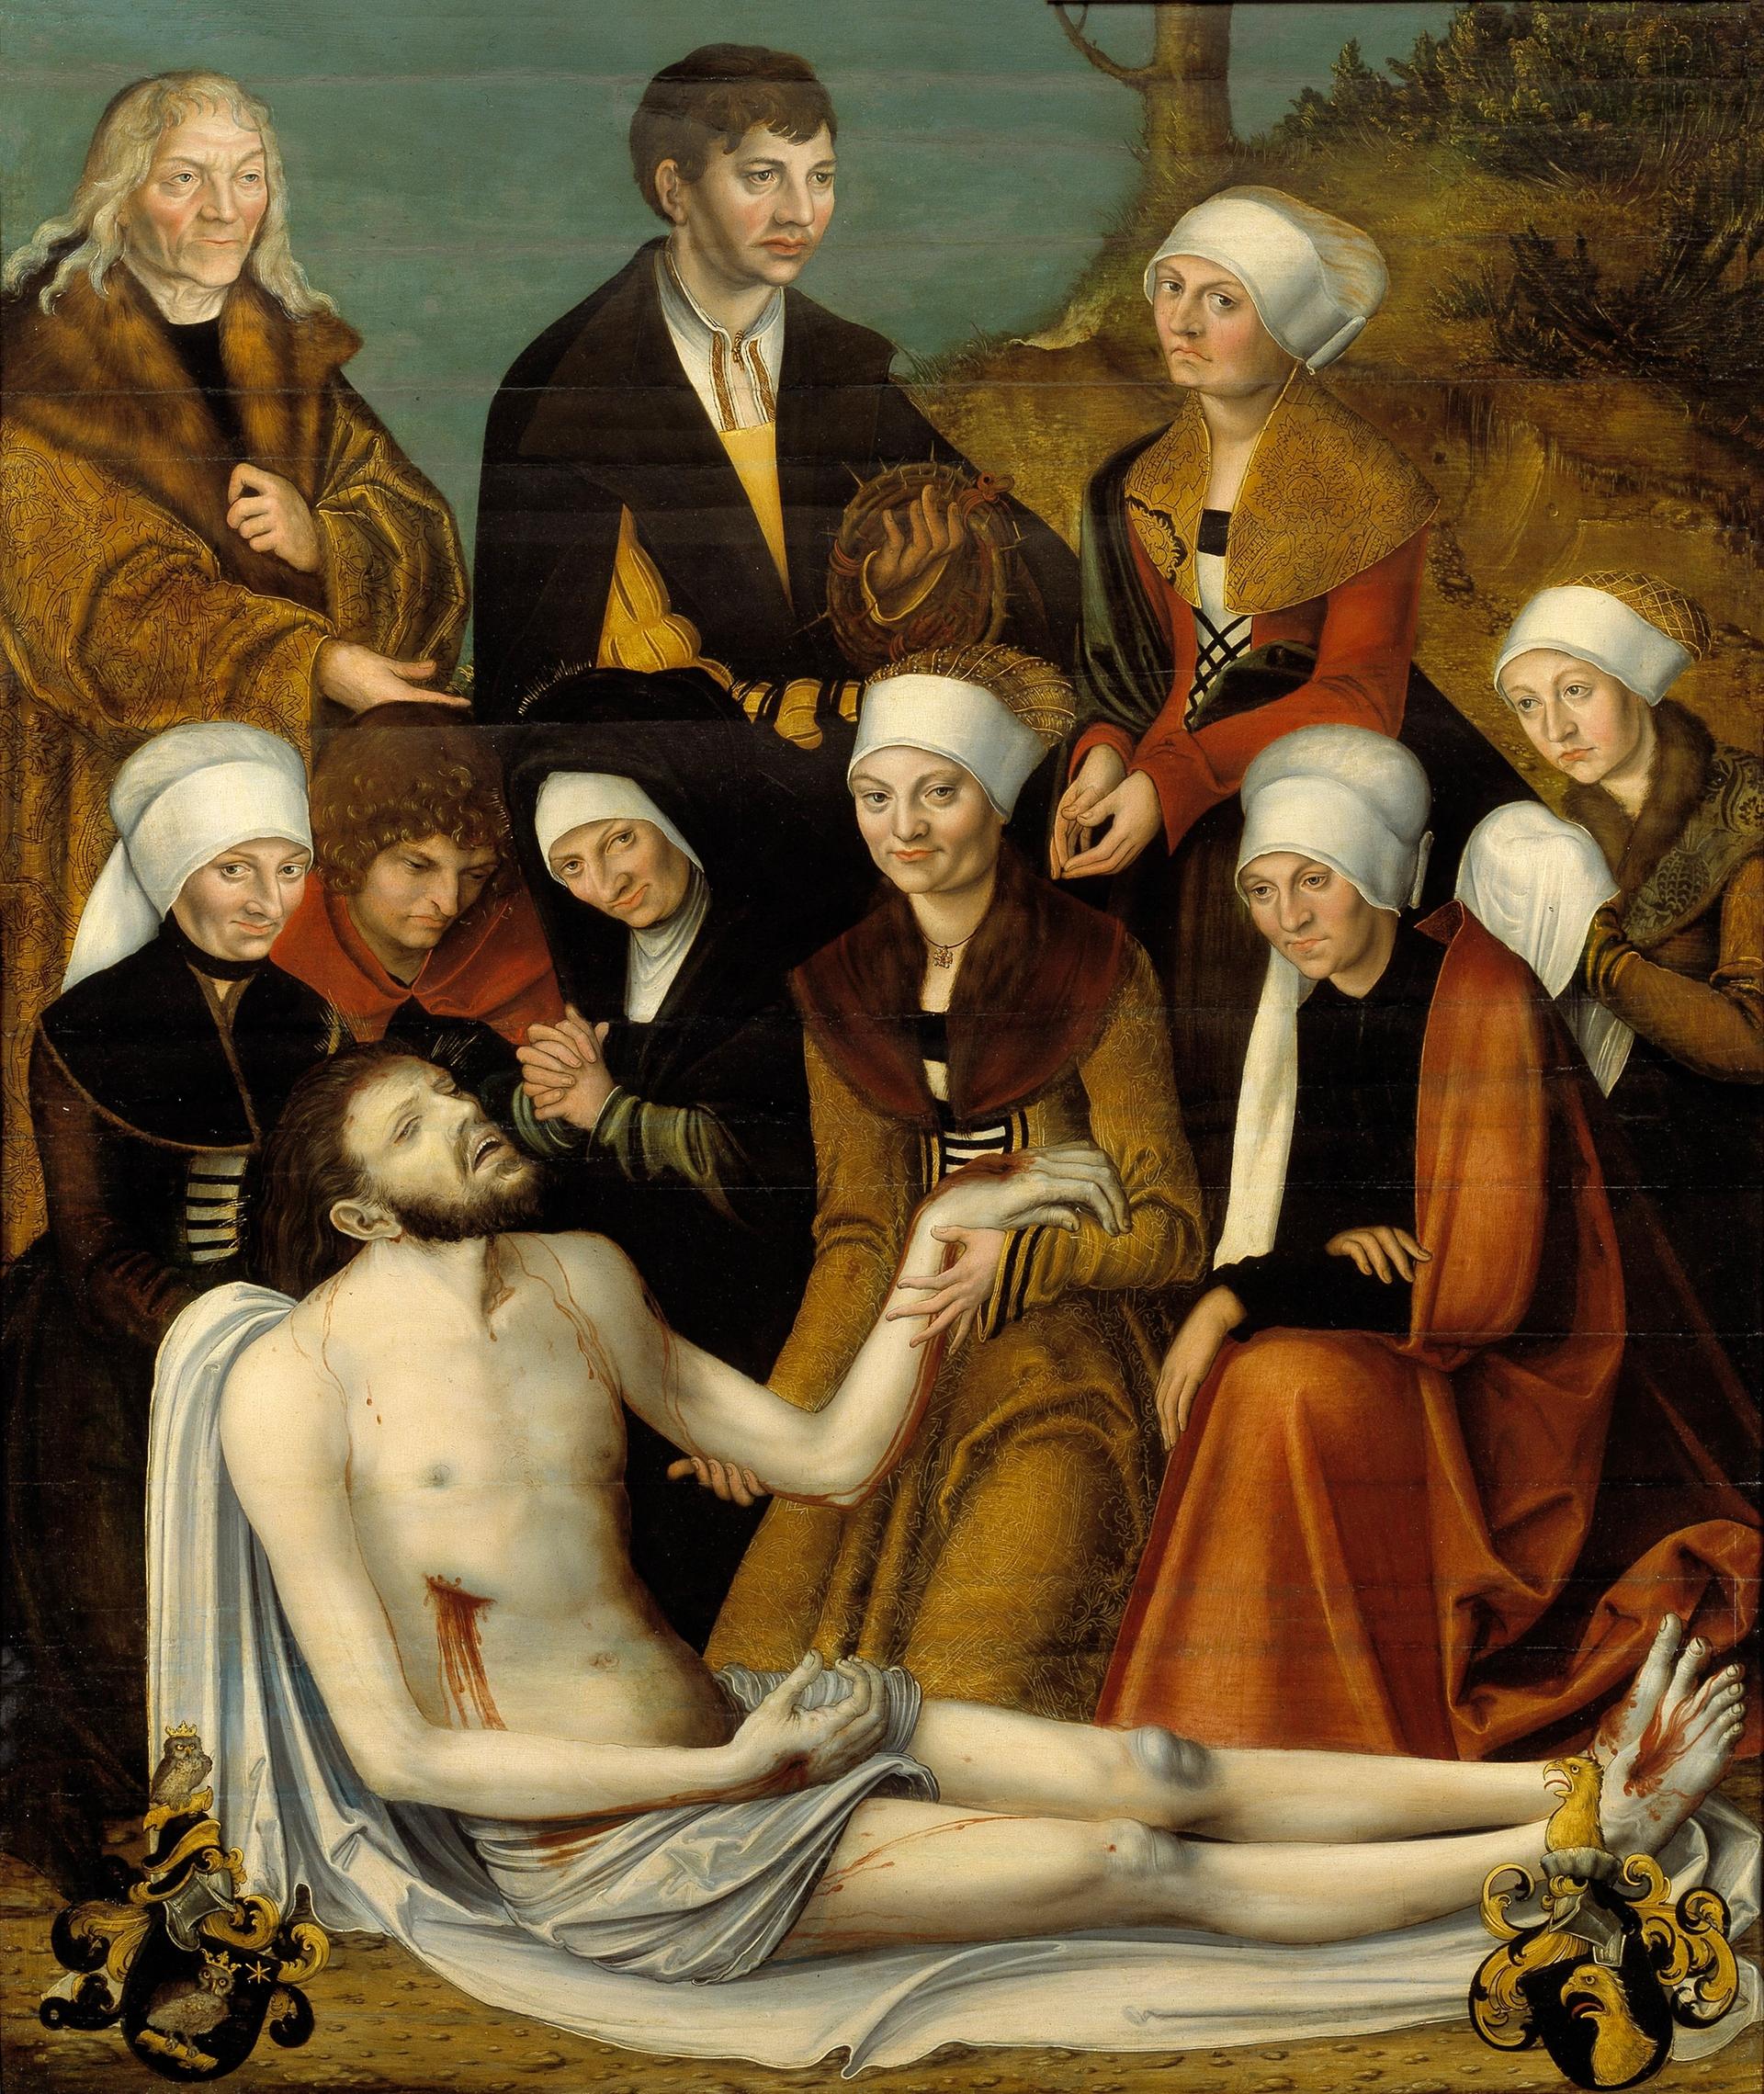 The Lamentation of Christ (around 1538) by the School of Lucas Cranach the Elder 